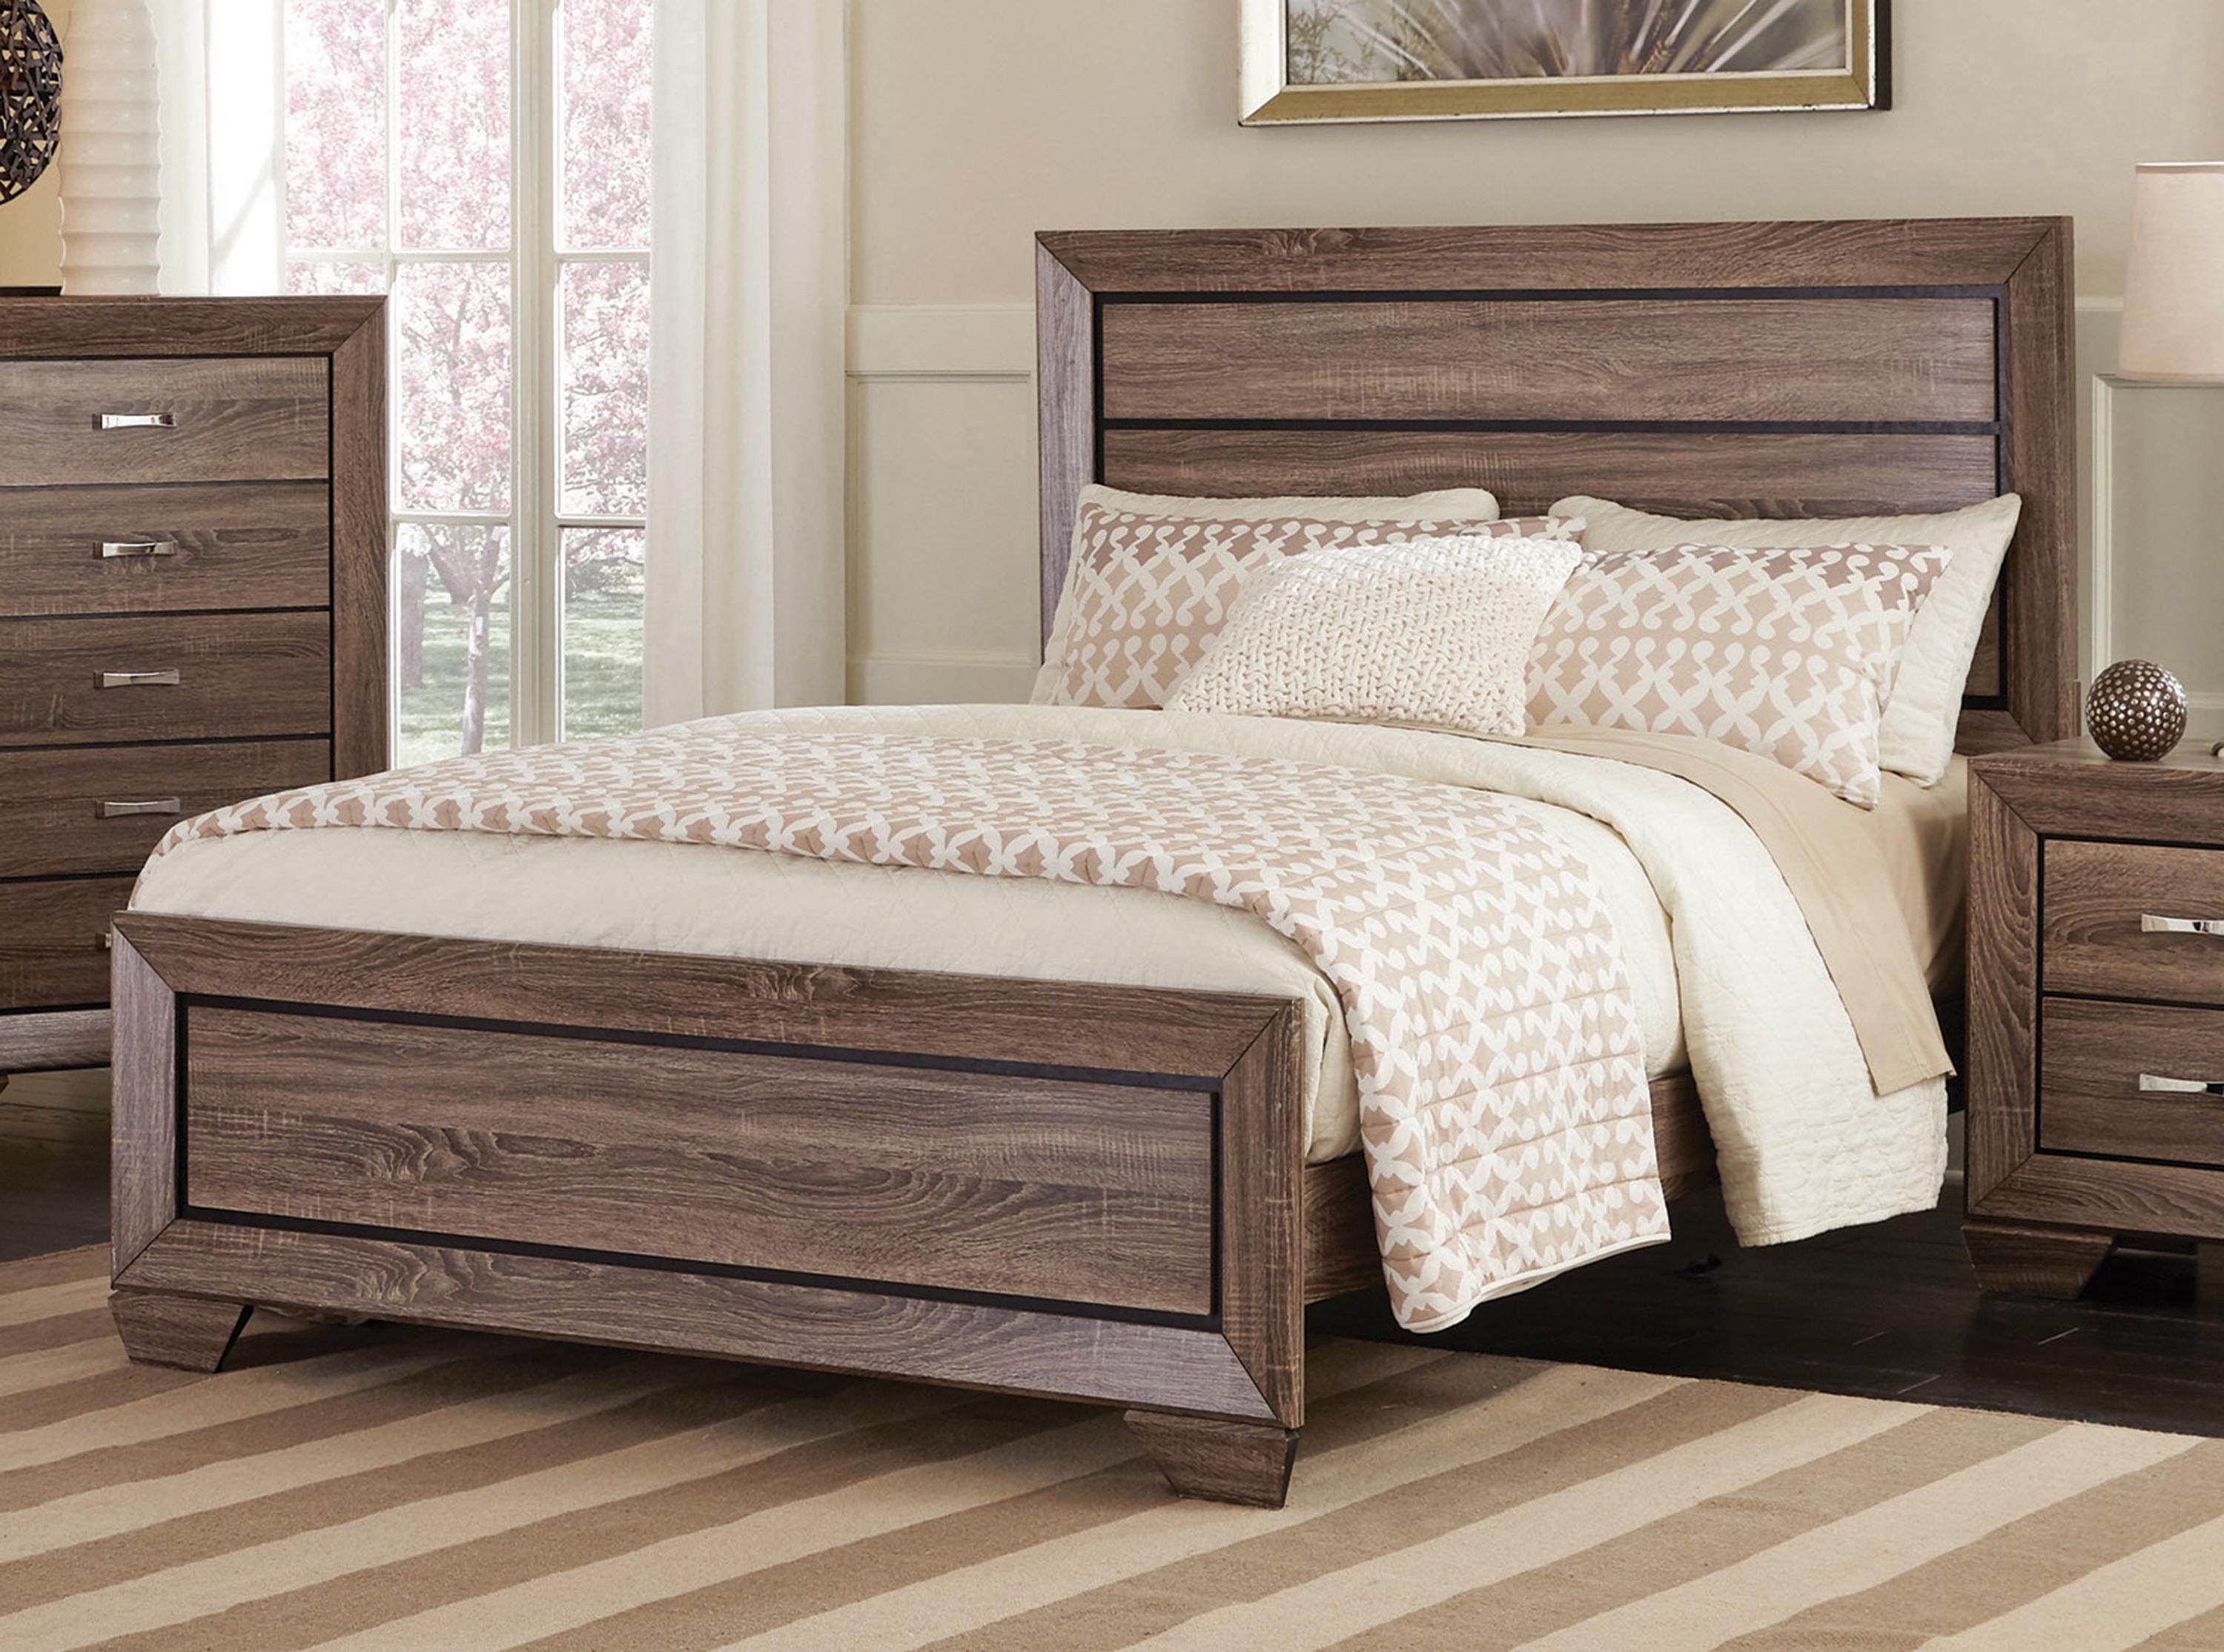 Transitional Bed 204191Q Kauffman 204191Q in Taupe 